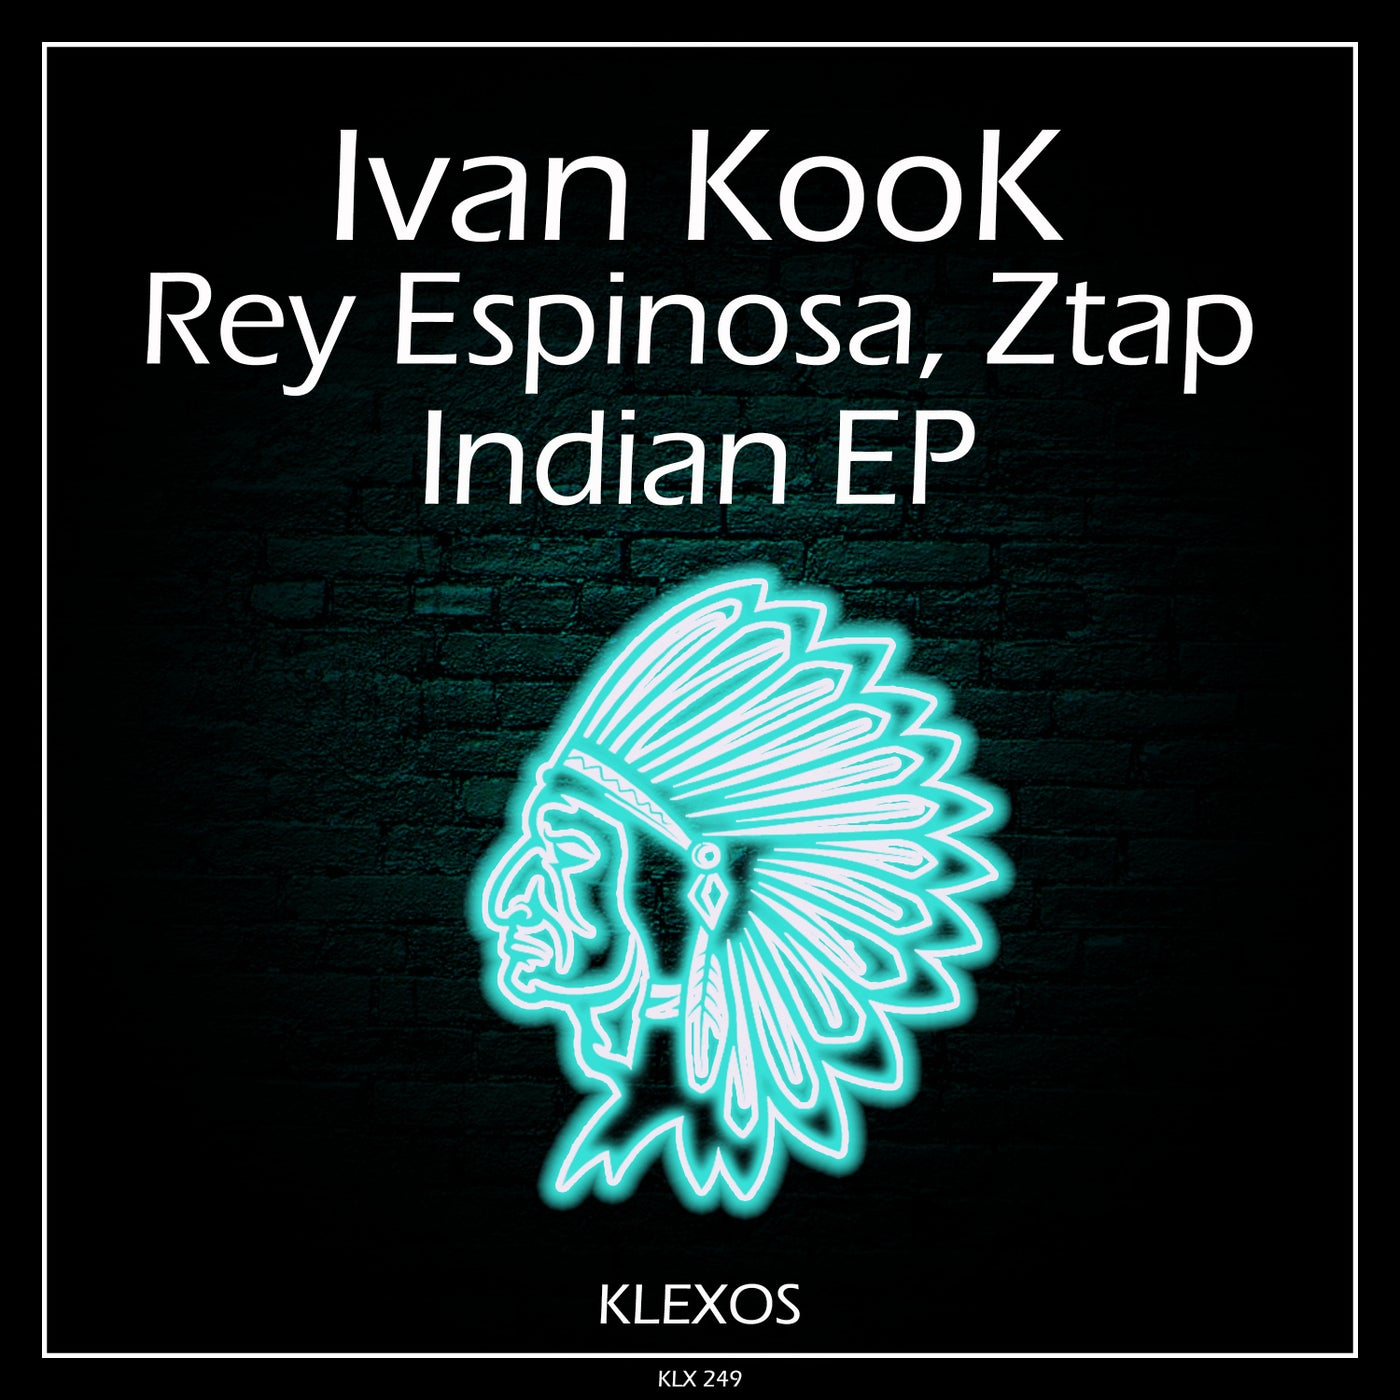 Indian EP